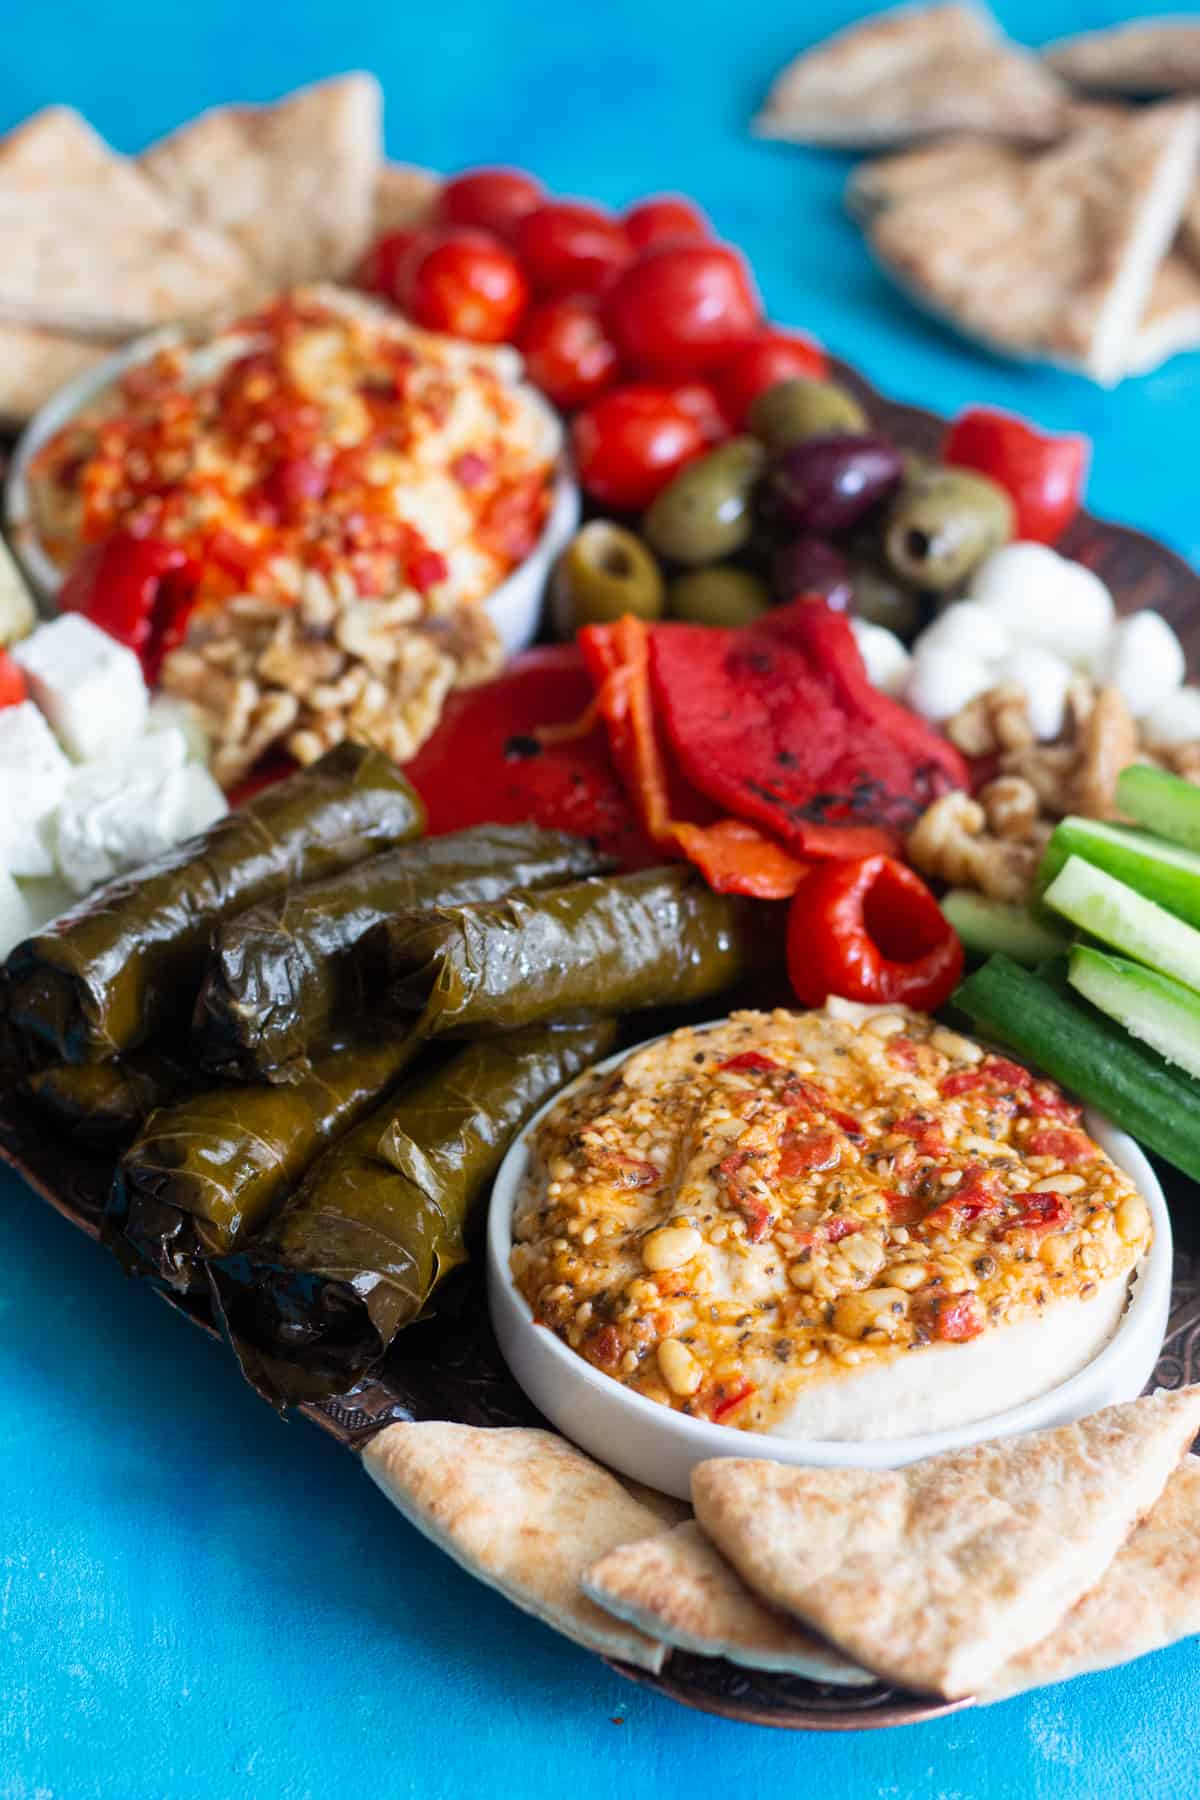 A tasty mezze platter is a cornerstone of any Mediterranean party. Learn how easy it is to build a Mediterranean mezze platter in just 10 minutes that will impress your guests and delight your taste buds!
